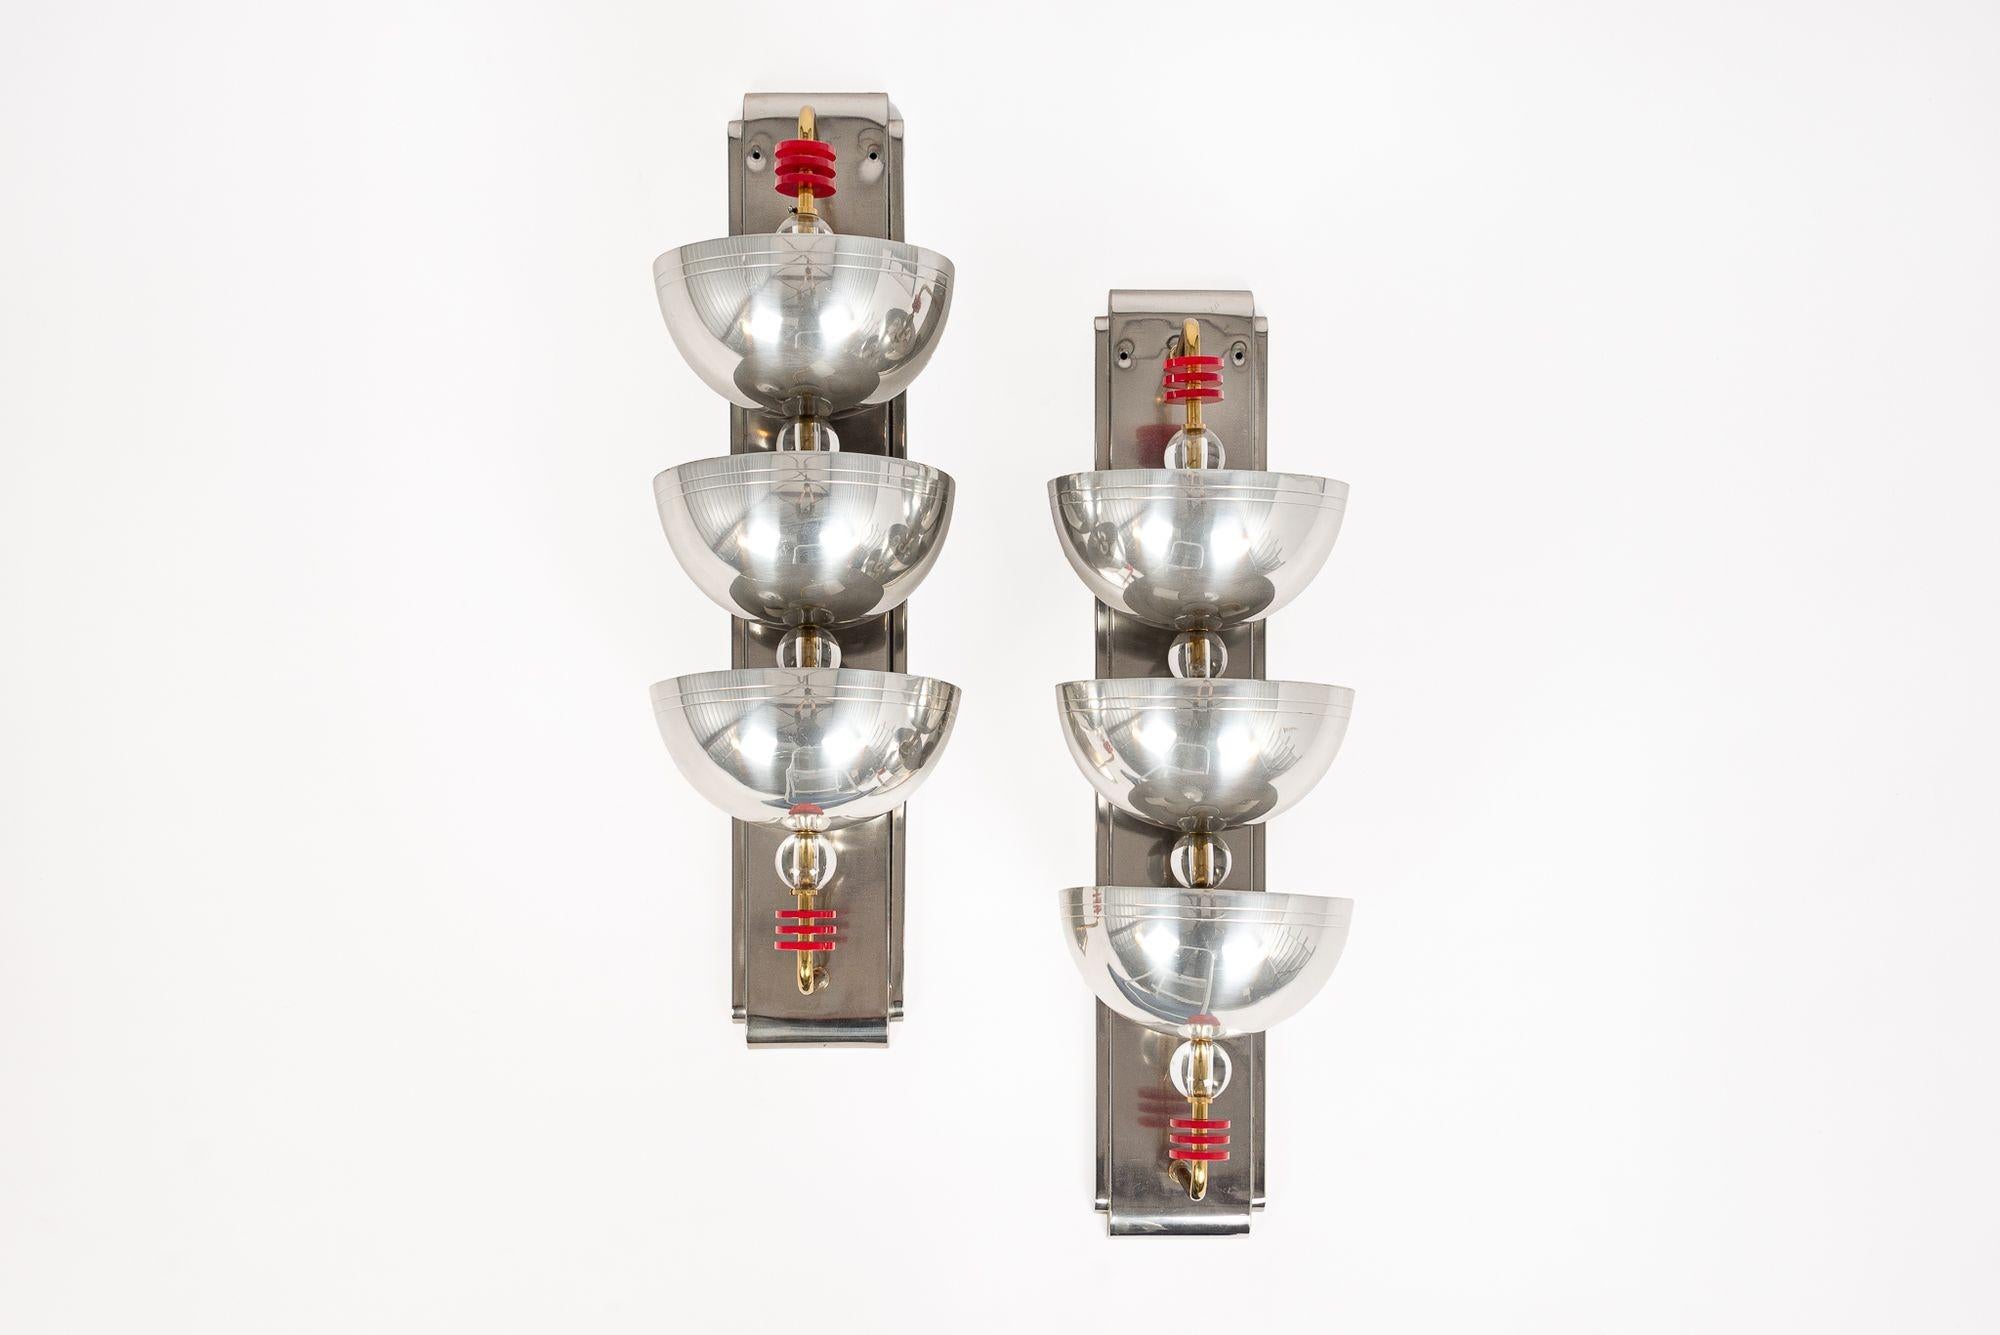 This incredible pair of antique Art Deco silver wall sconce lights are circa 1940. The sconce lamps feature three large metal cups on brass bars mounted to heavy solid metal wall plates with round, clear balls below each cup and red, disk-shaped